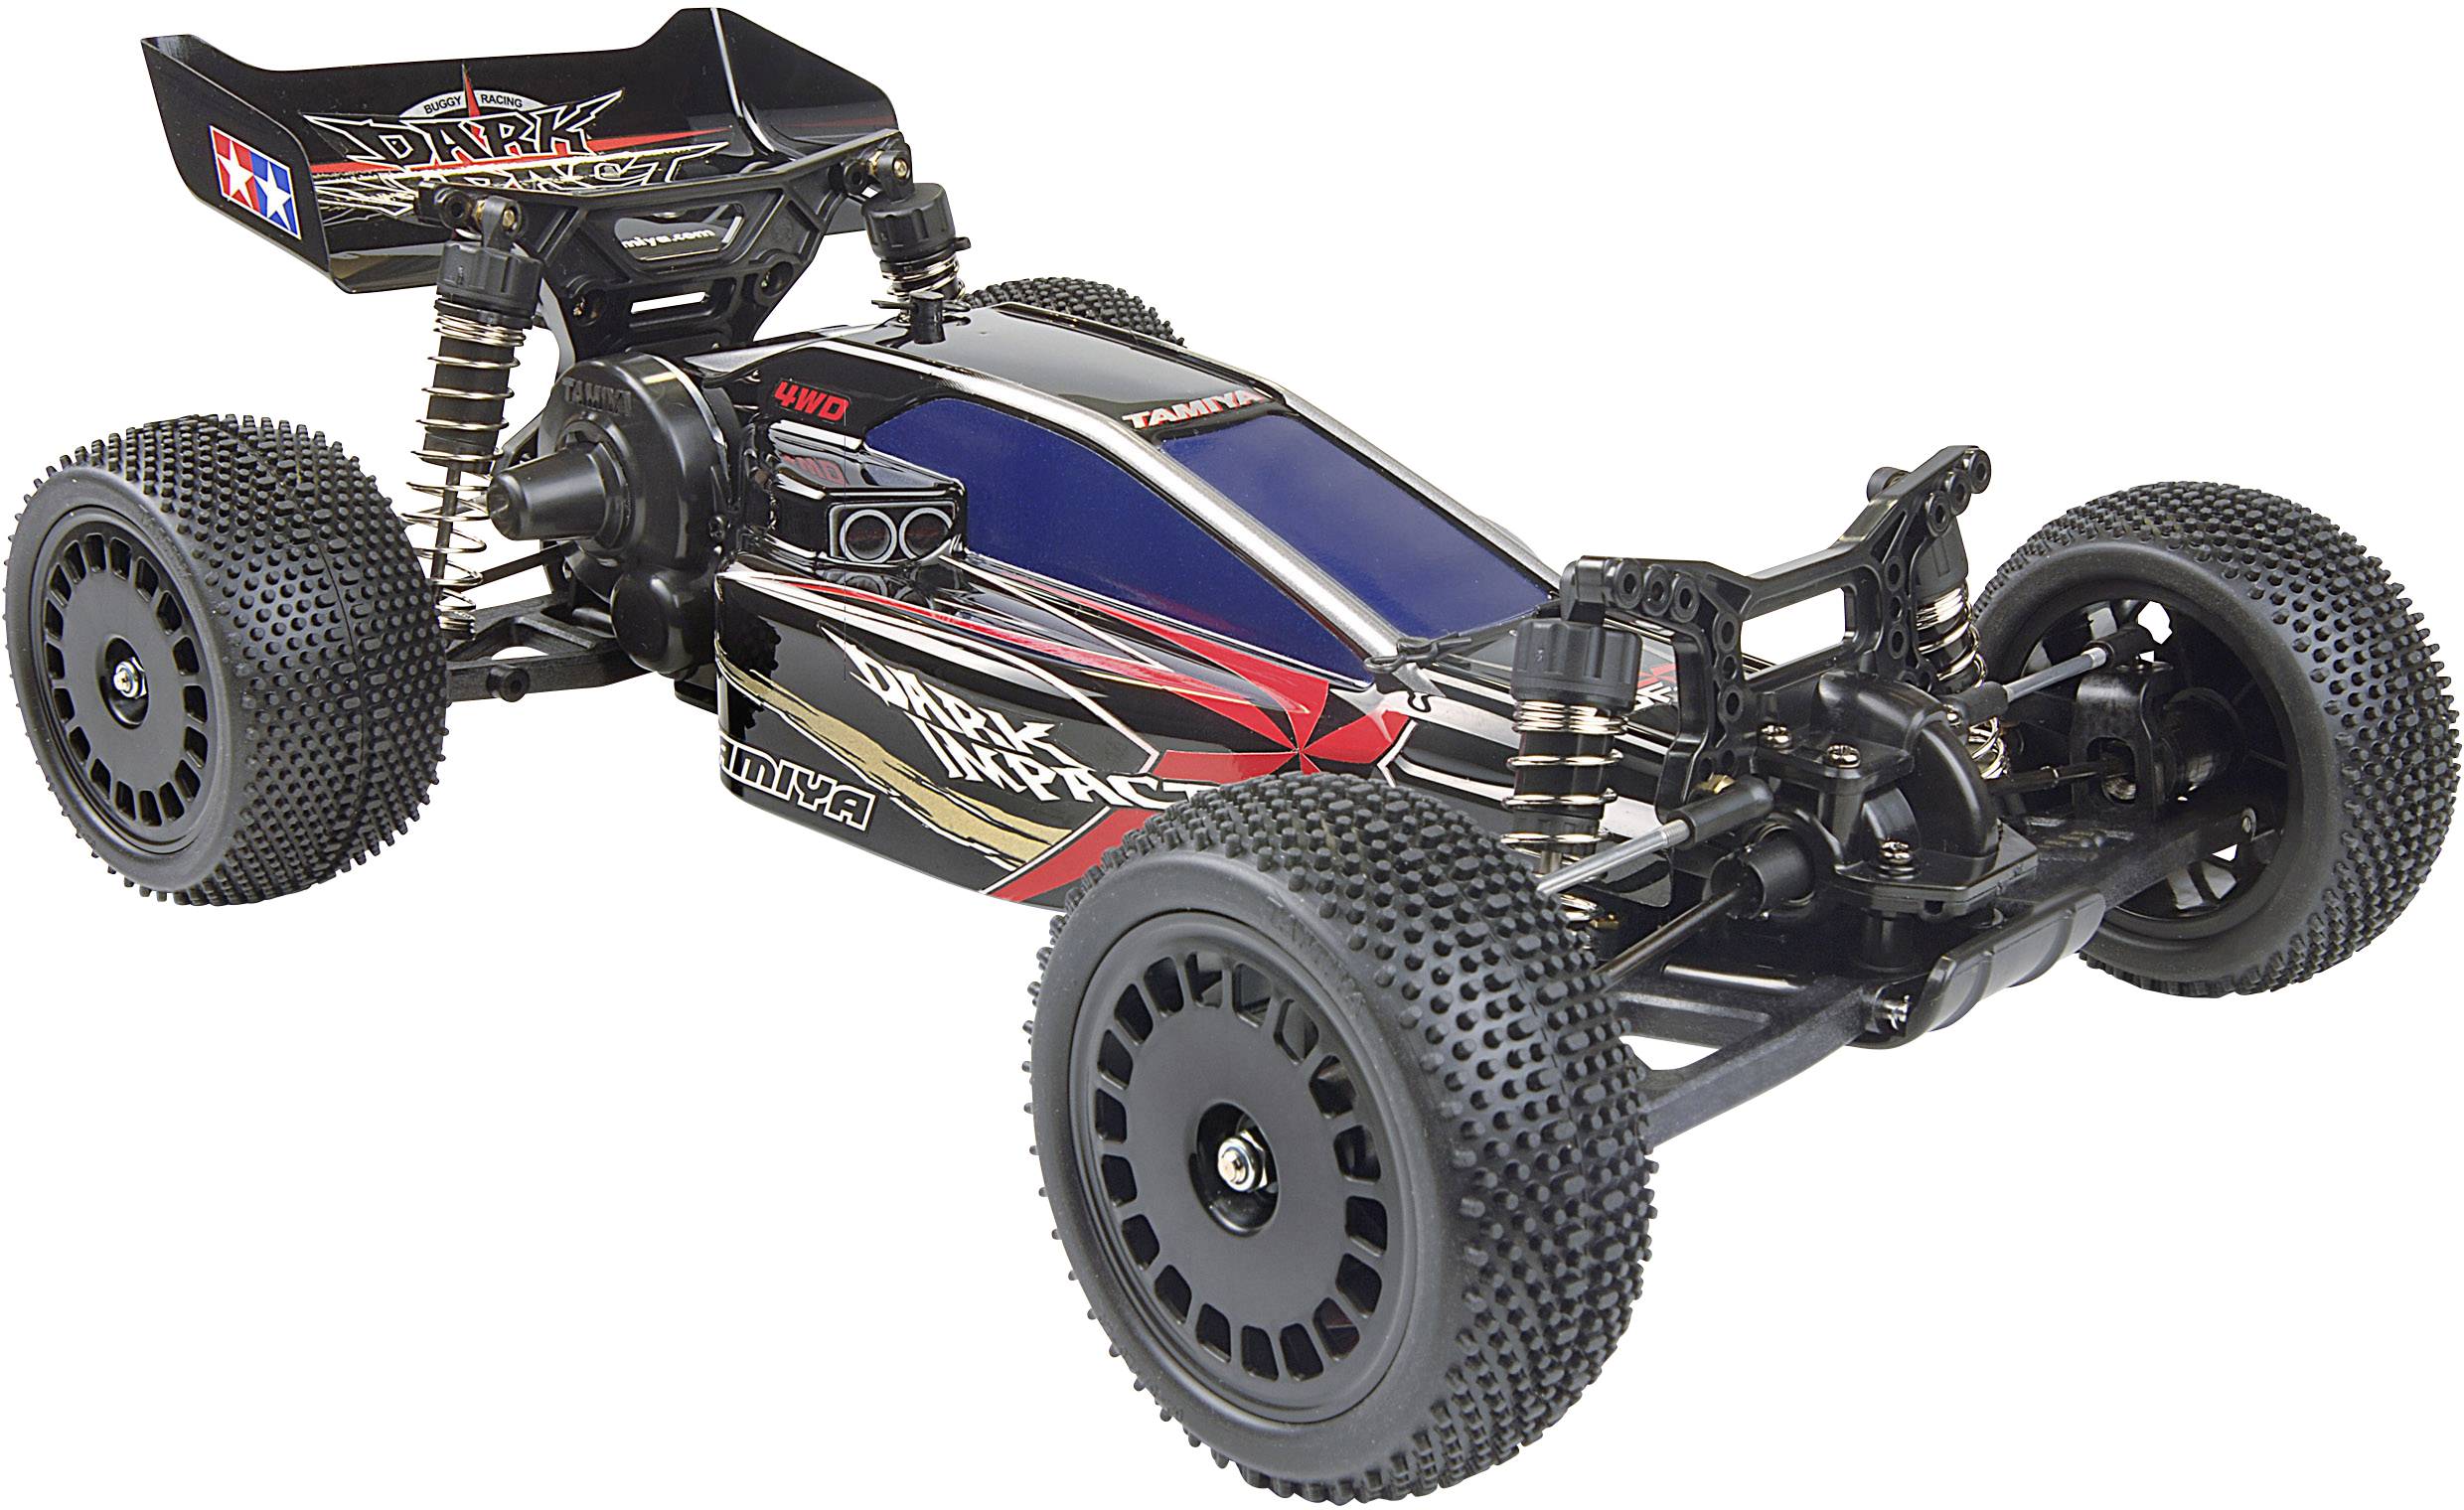 Tamiya Dark Impact brushed 1:10 Auto RC électrique Buggy 4 roues